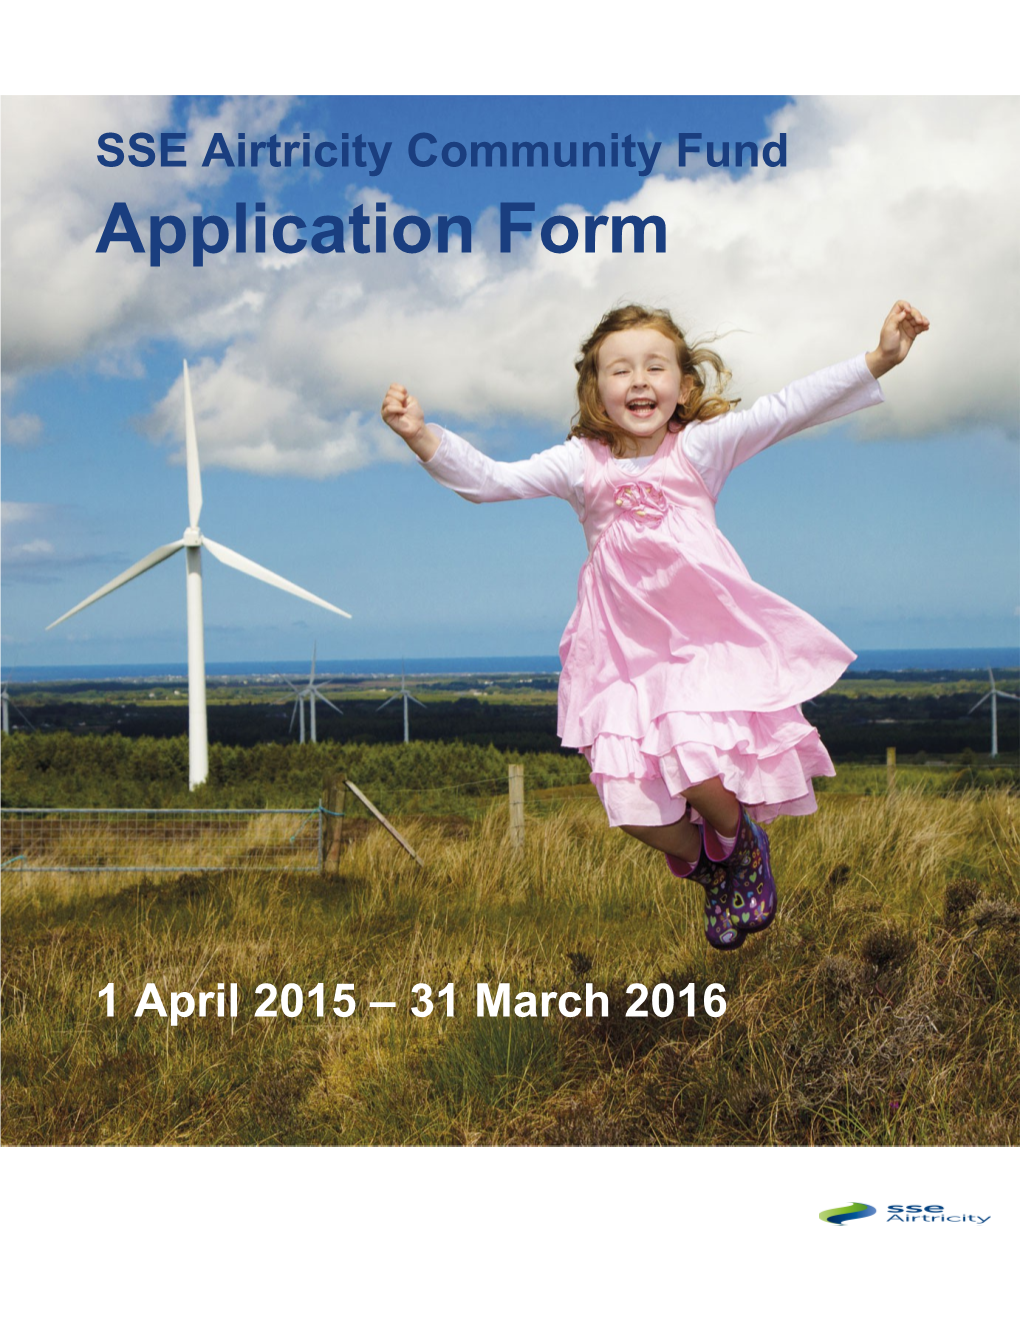 Airtricity Community Fund Application Guidelines